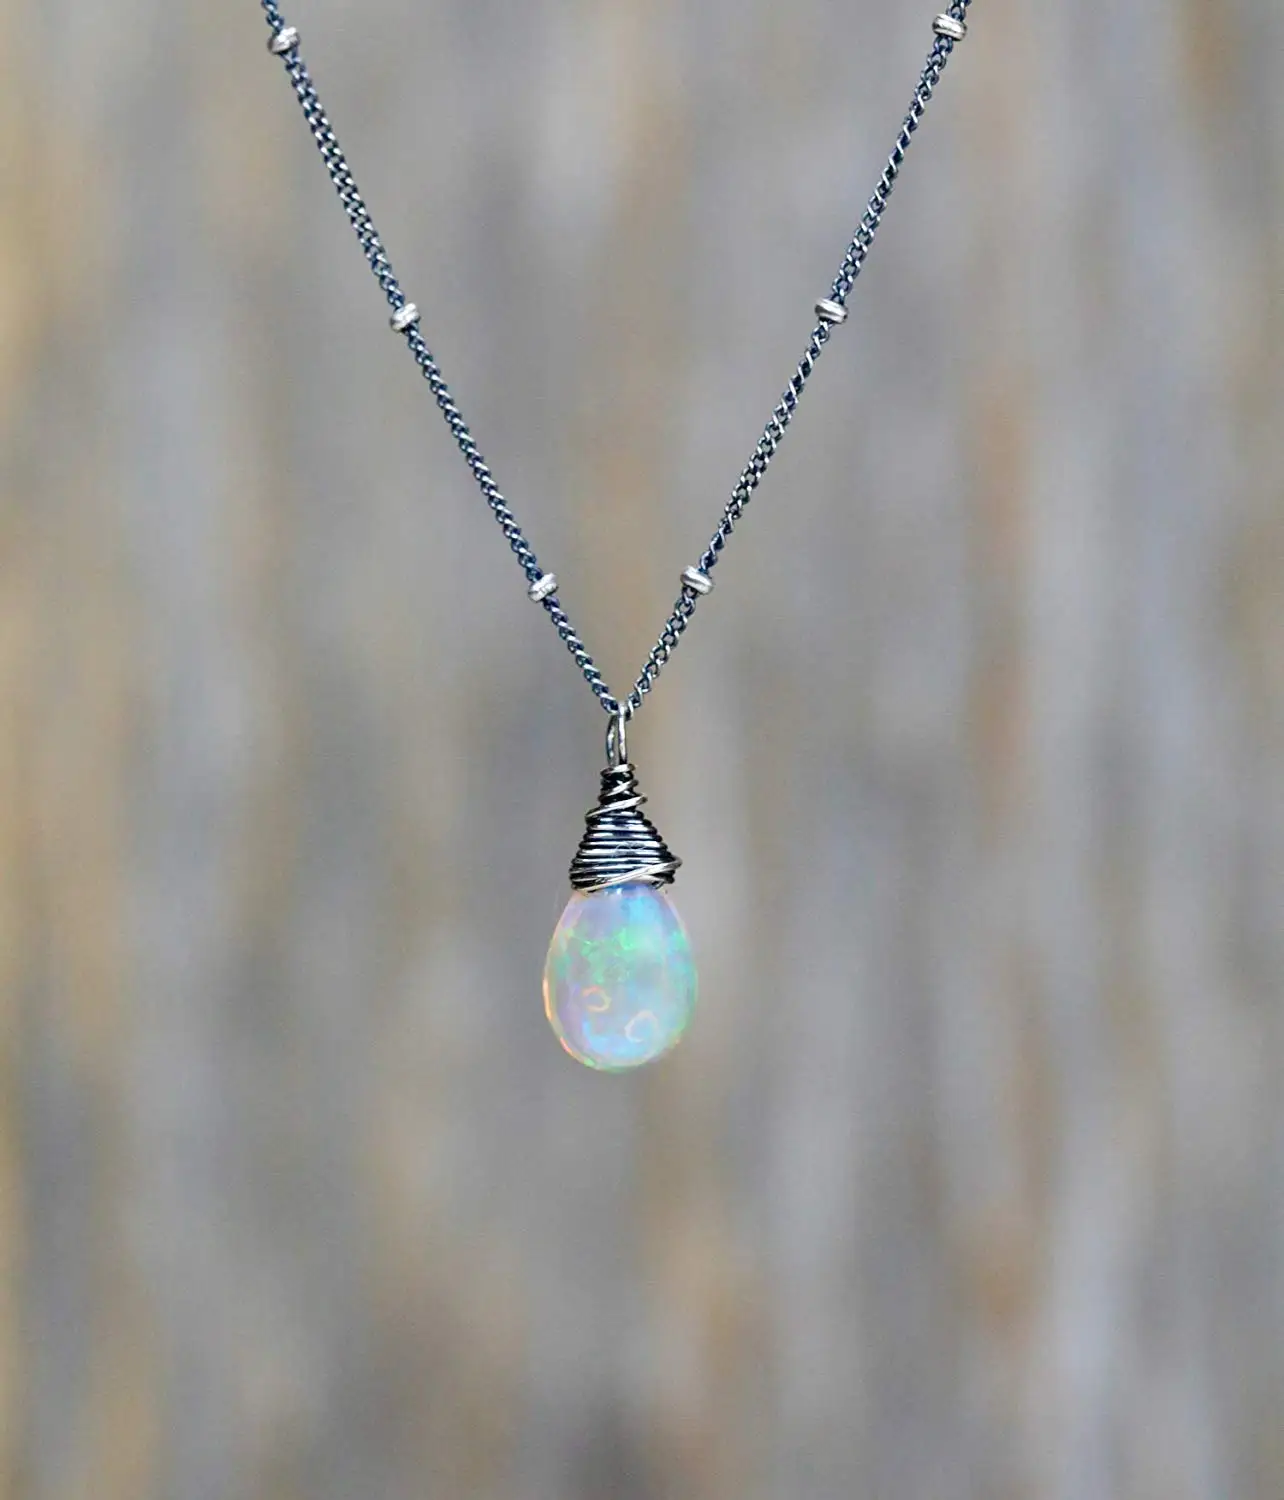 Cheap Real Opal Necklace, find Real Opal Necklace deals on line at